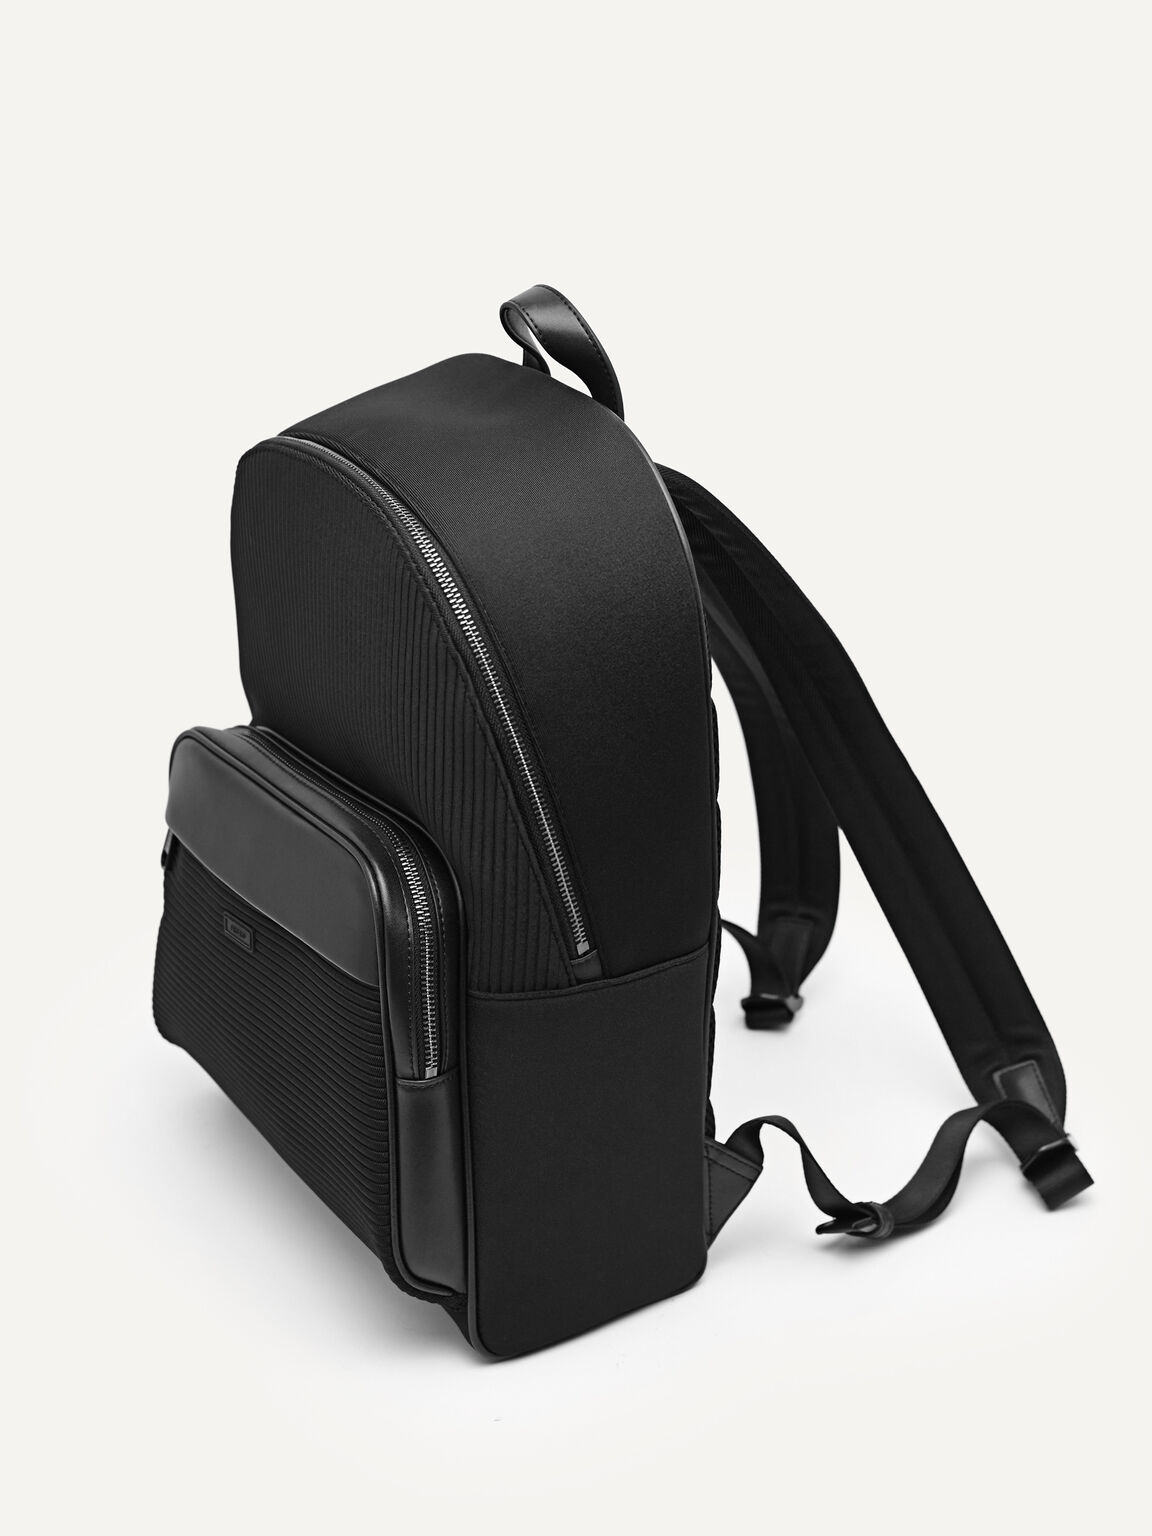 rePEDRO Pleated Backpack, Black, hi-res